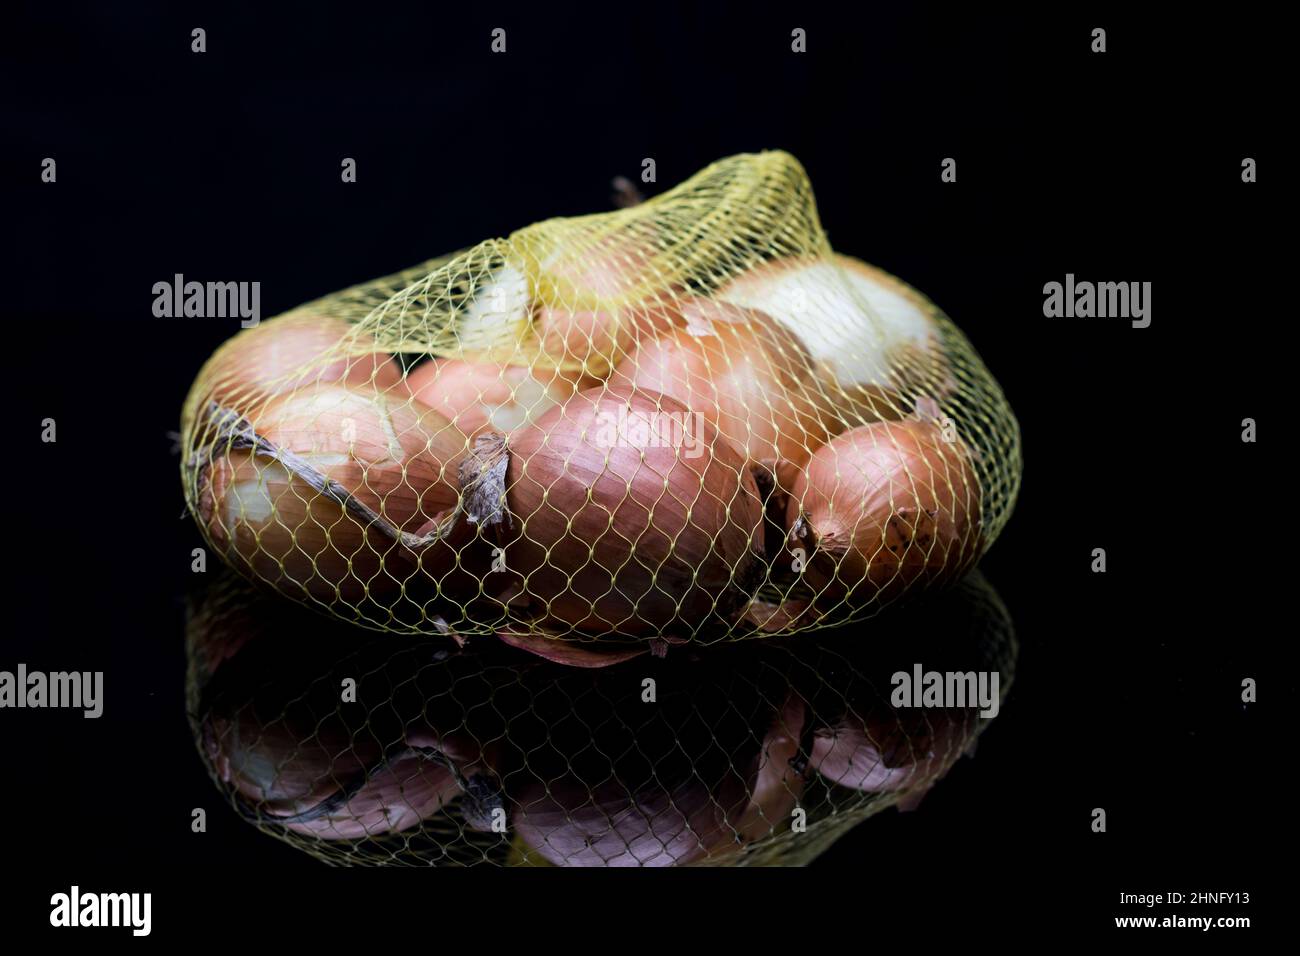 Cooking ingredients onions for cooking. Bag of brown onions with hand selecting one for cooking. Stock Photo